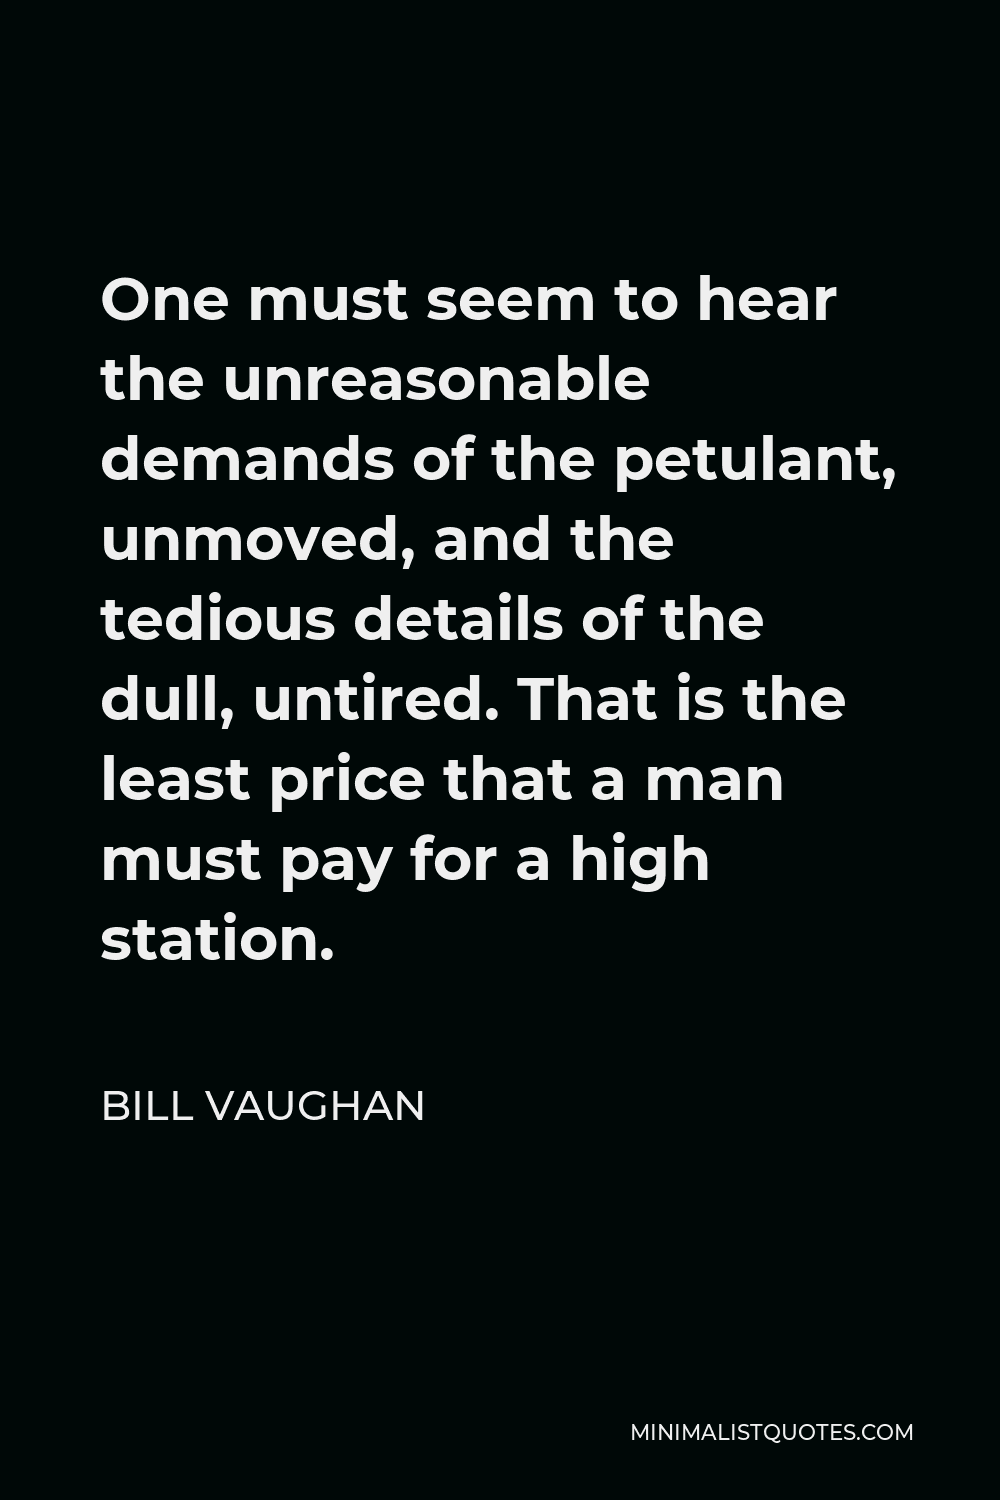 Bill Vaughan Quote - One must seem to hear the unreasonable demands of the petulant, unmoved, and the tedious details of the dull, untired. That is the least price that a man must pay for a high station.